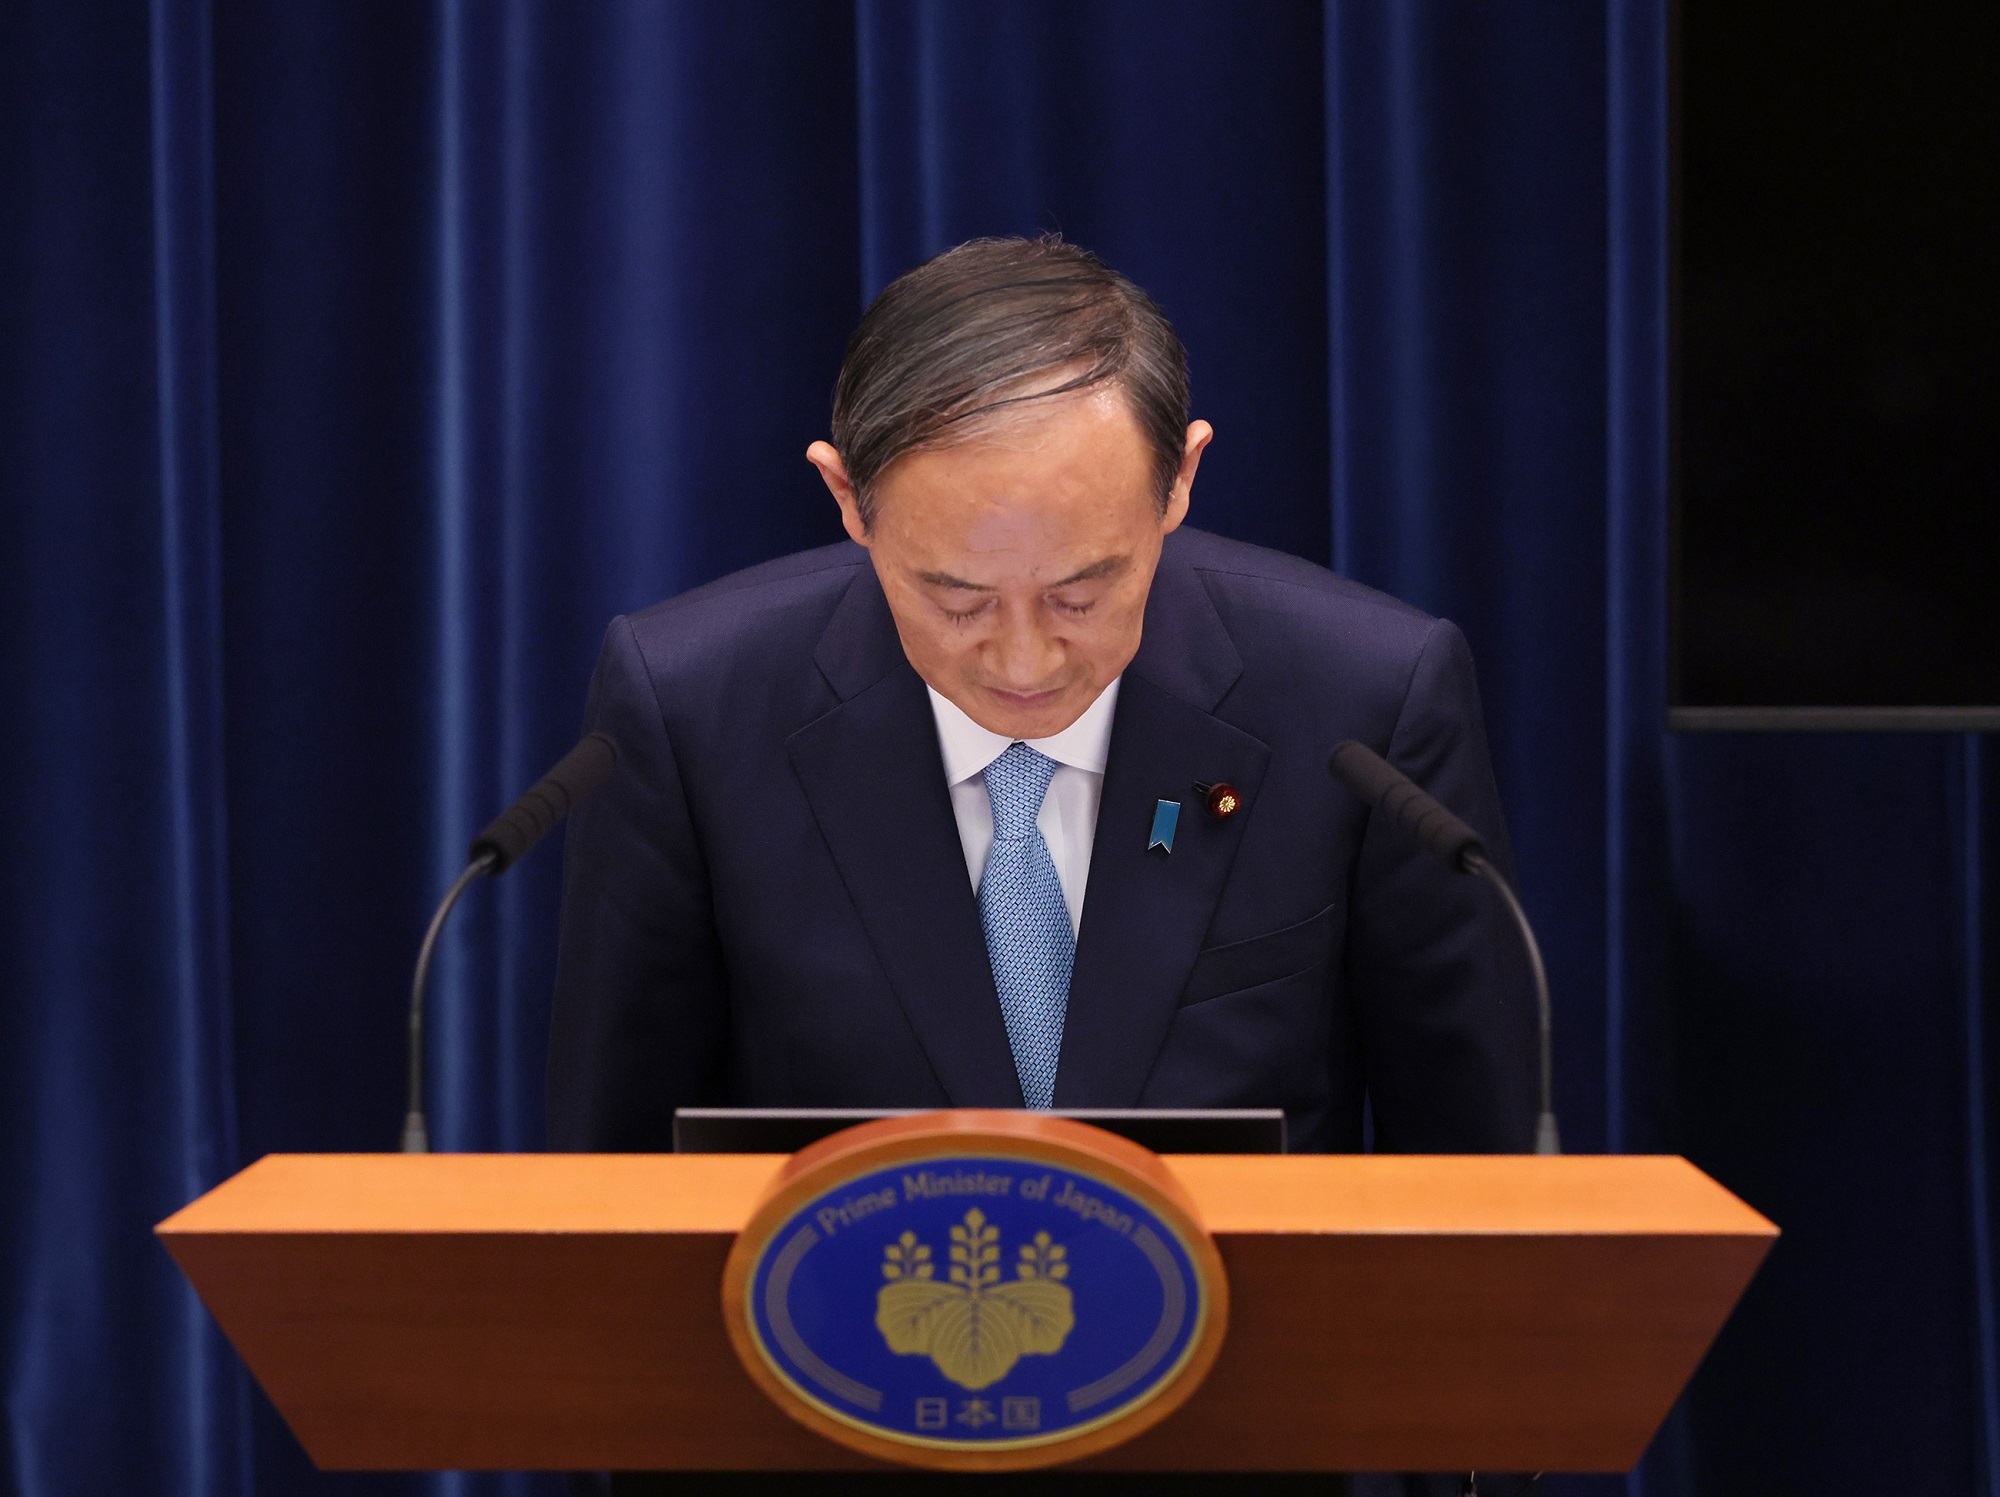 Photograph of the Prime Minister holding a press conference (8)